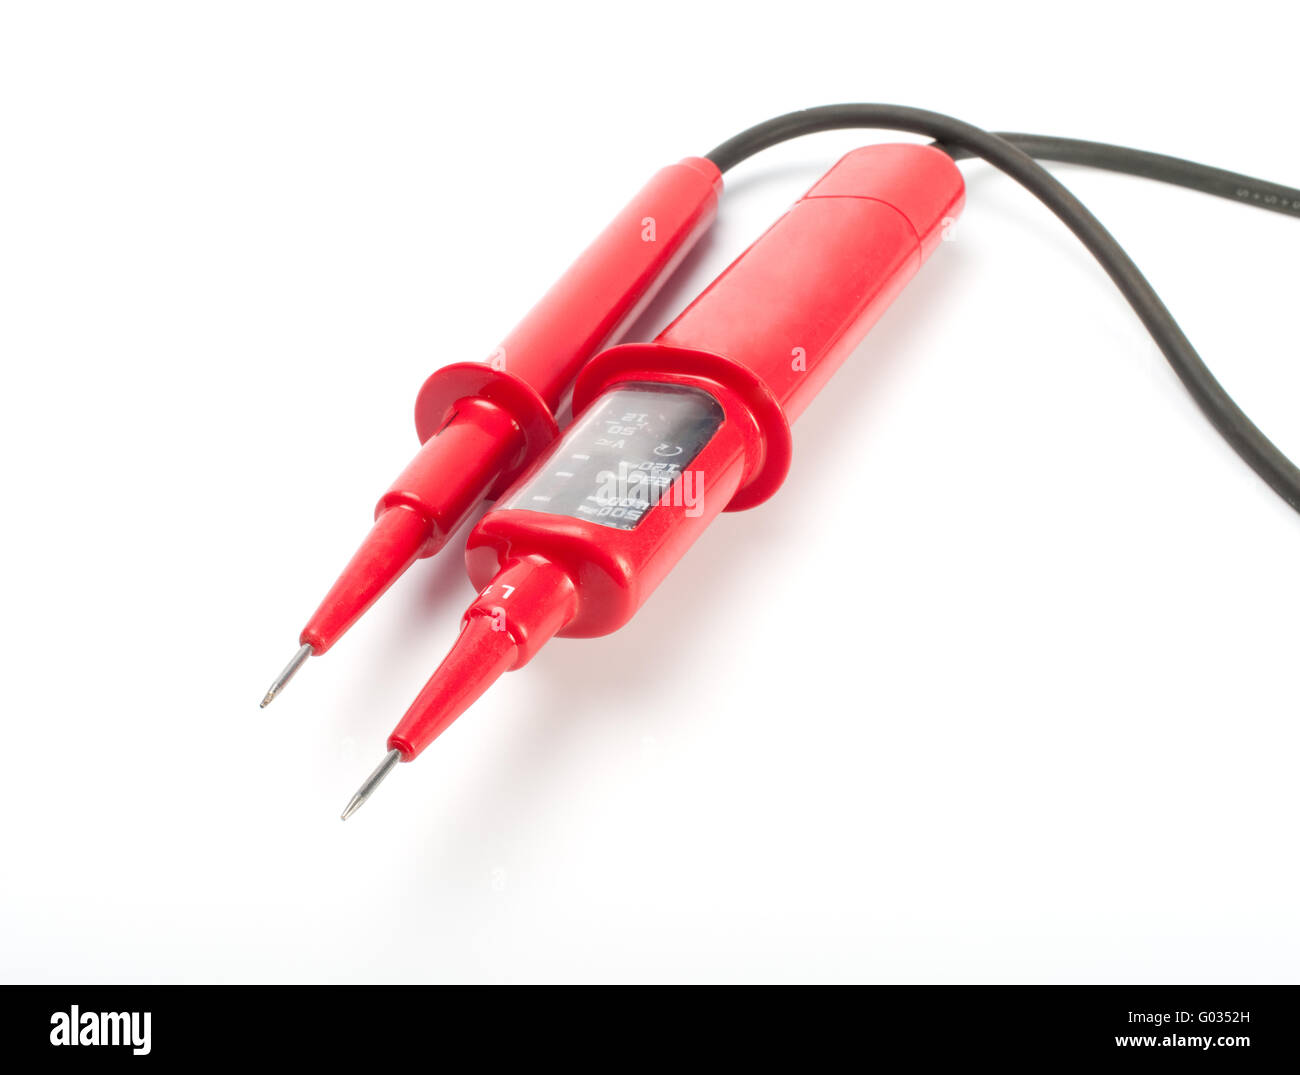 Two Electrical Multi Or Voltage Meter Probes On A White Background Stock  Photo, Picture and Royalty Free Image. Image 101183639.